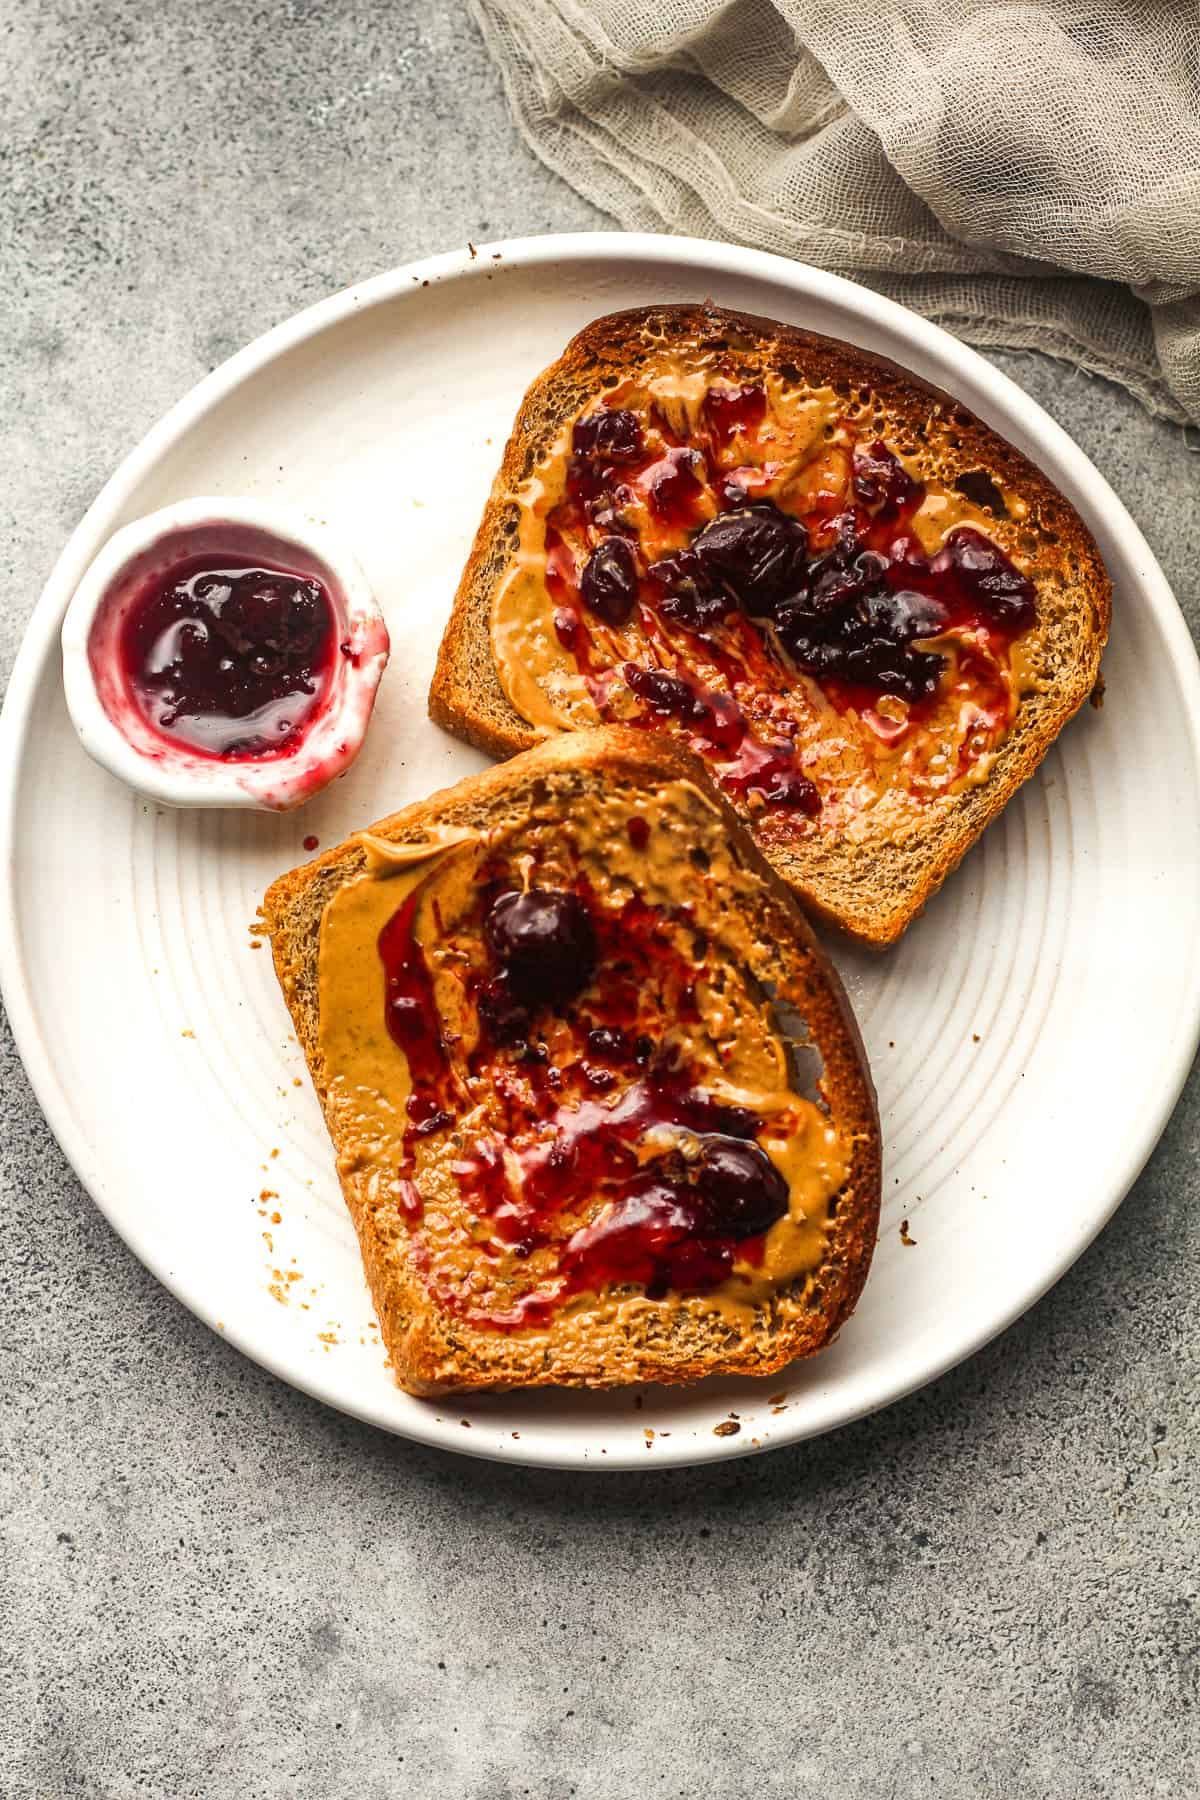 A plate of two pieces of toast with peanut butter and jelly.